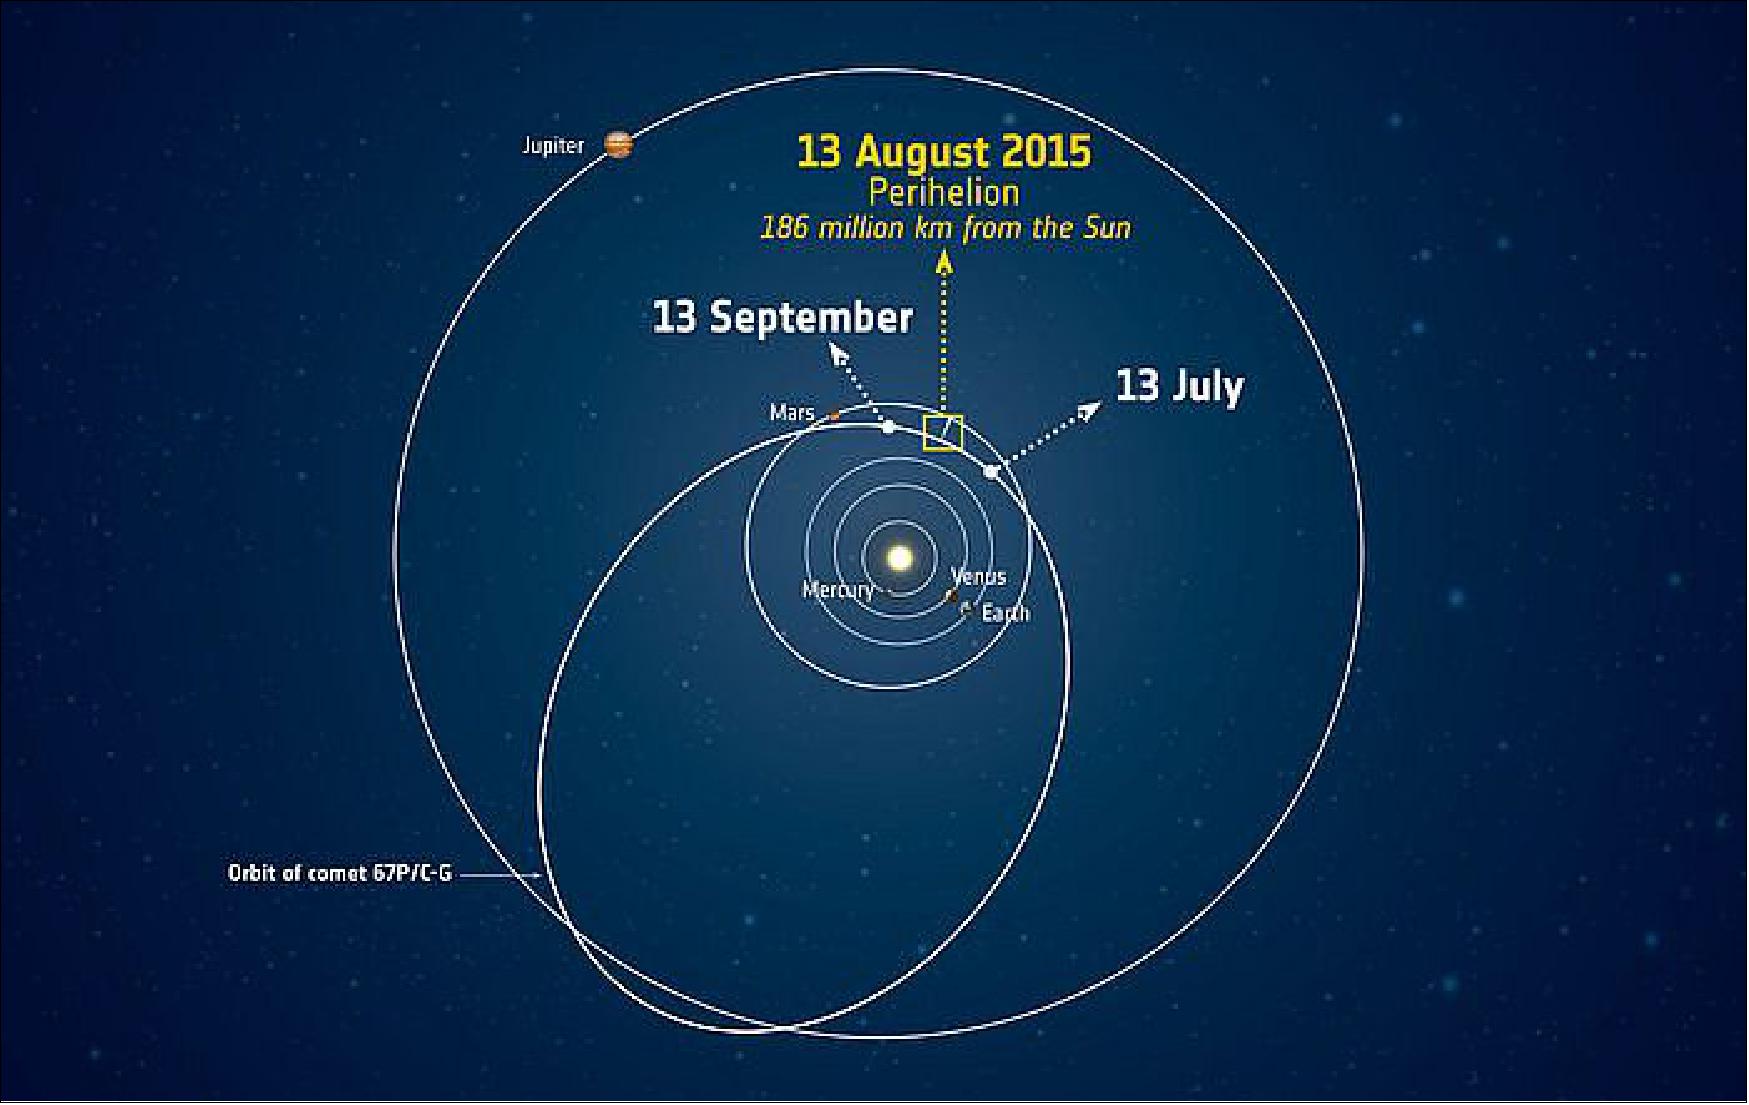 Figure 134: The orbit of Comet 67P/Churyumov-Gerasimenko and its approximate location around perihelion, the closest the comet gets to the Sun. The positions of the planets are correct for 13 August 2015 (image credit: ESA)